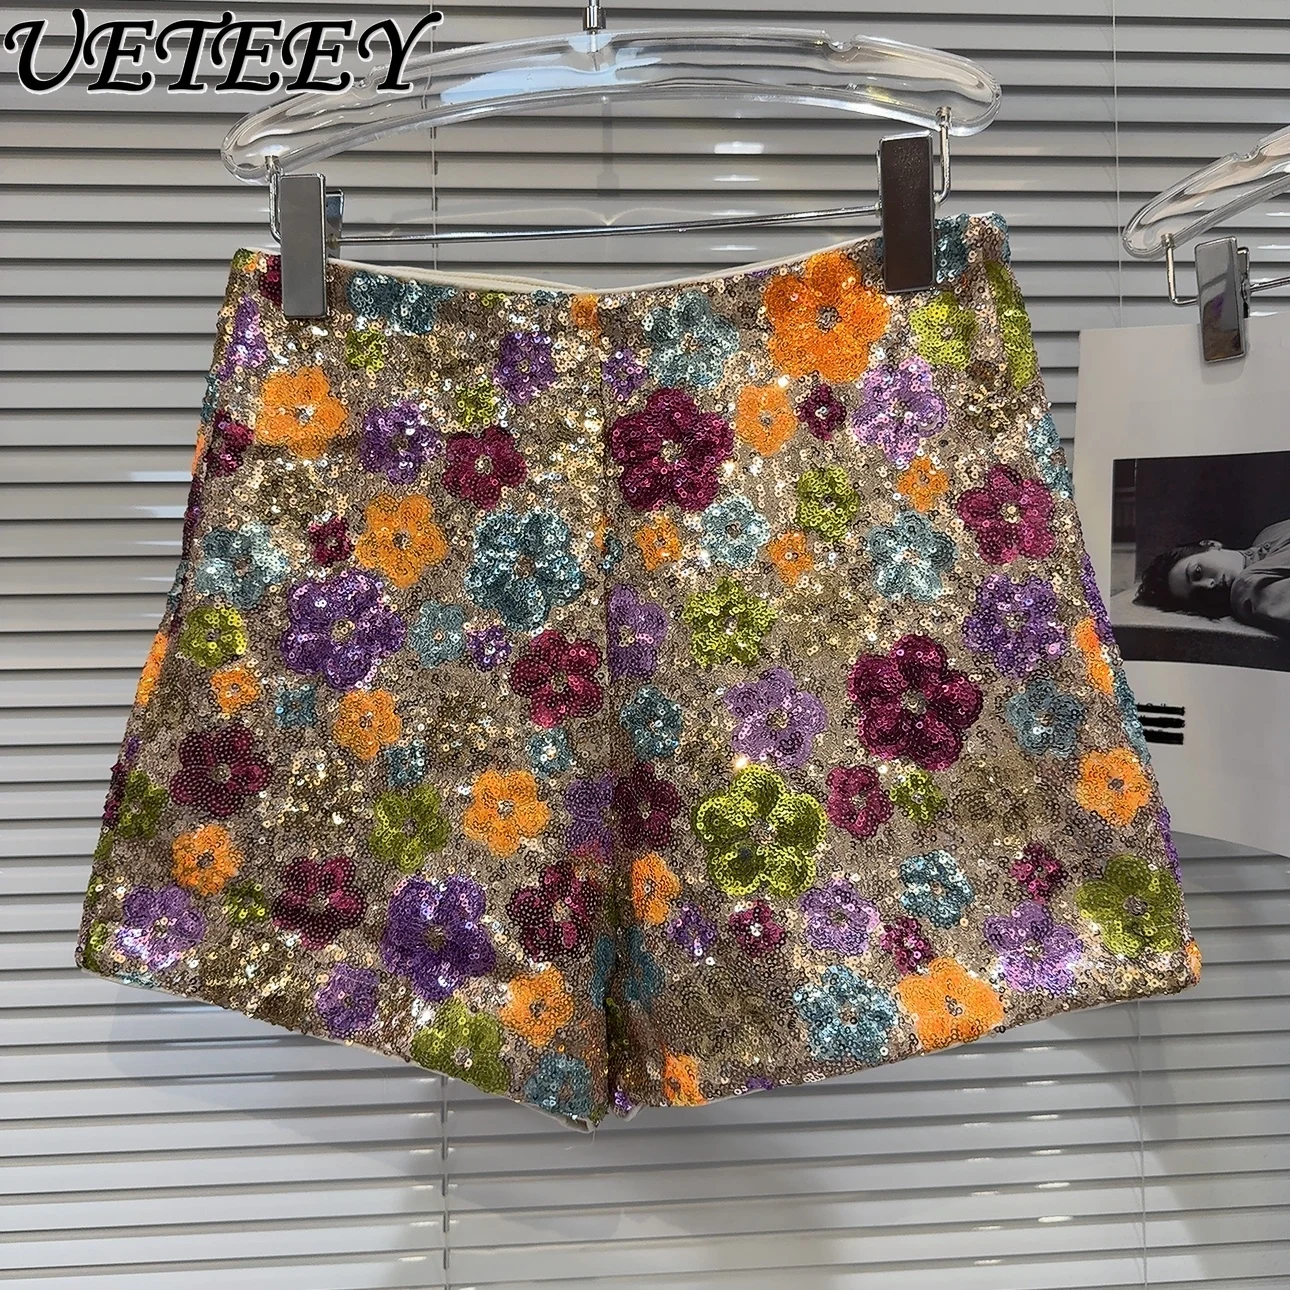 

Summer New Personalized Hot Girl Heavy Embroidery Sequins Flower Shorts Women High Waist Slim Shorts Pantalones Cortos De Mujer